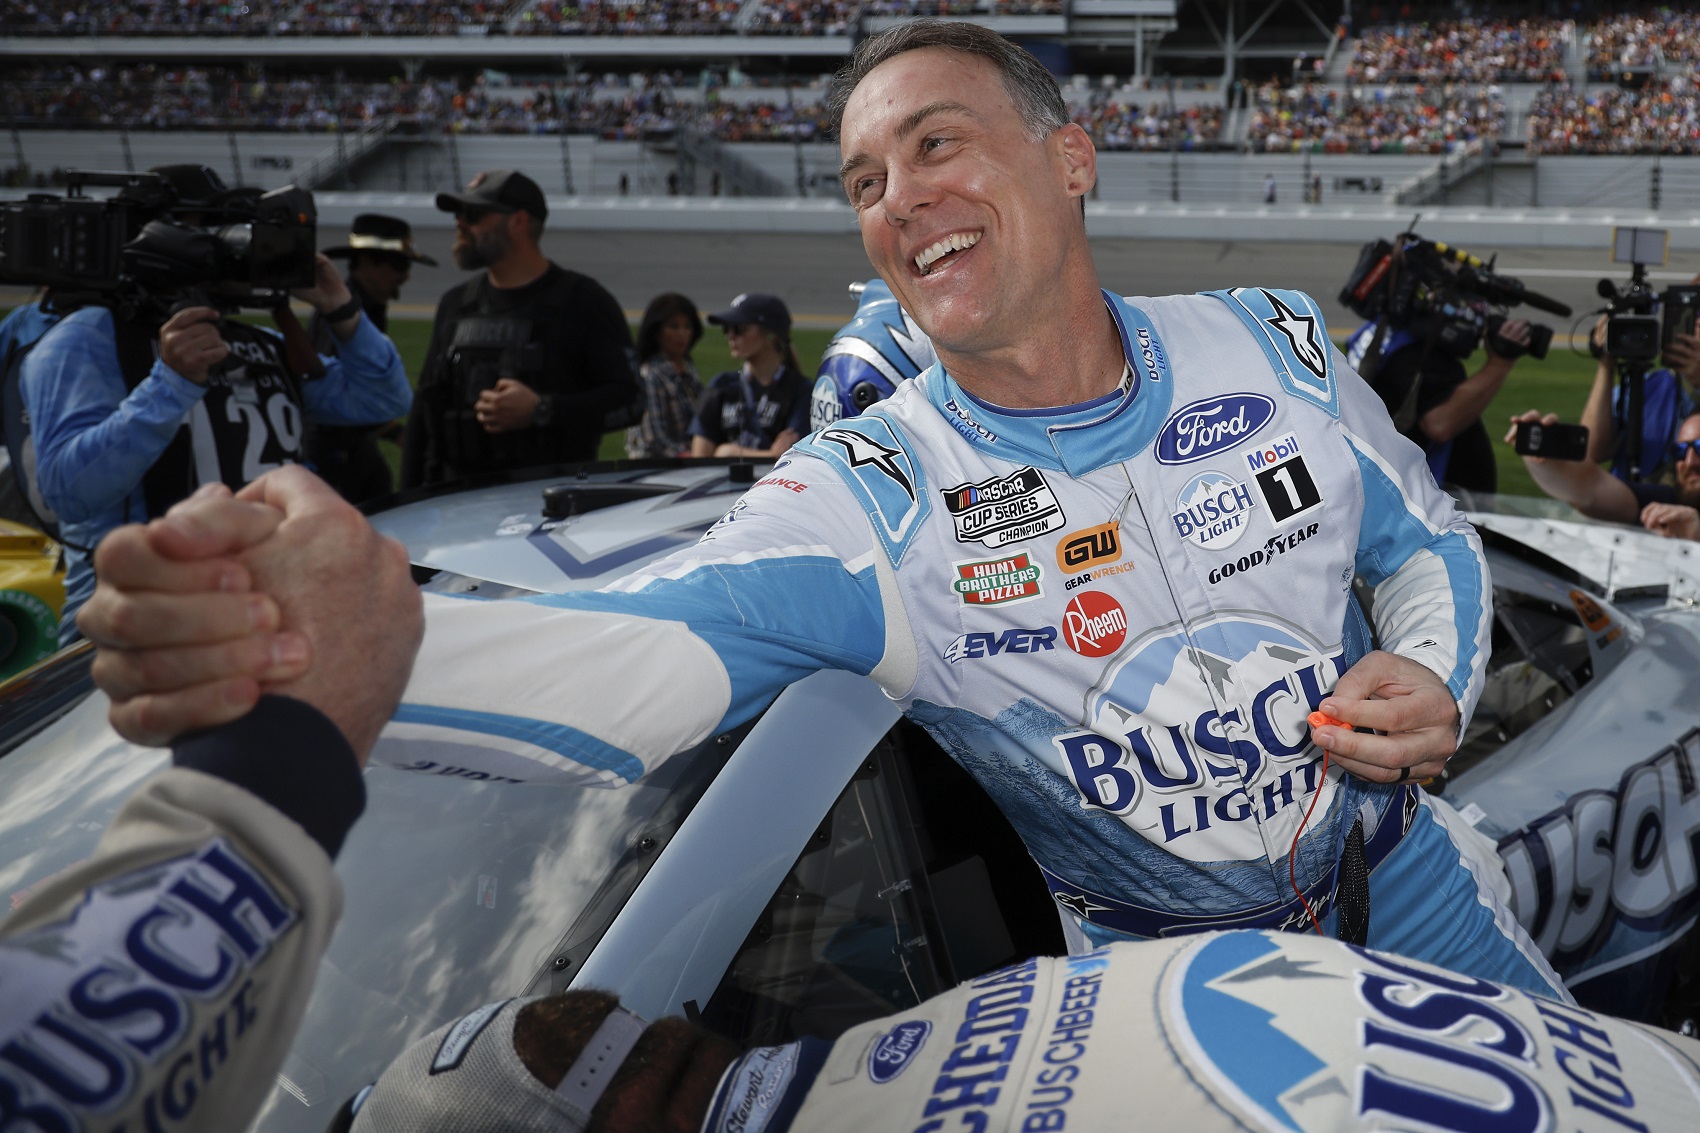 DAYTONA BEACH, FLORIDA - FEBRUARY 19: Kevin Harvick, driver of the #4 Busch Light Ford, greets a crew member prior to the NASCAR Cup Series 65th Annual Daytona 500 at Daytona International Speedway on February 19, 2023 in Daytona Beach, Florida